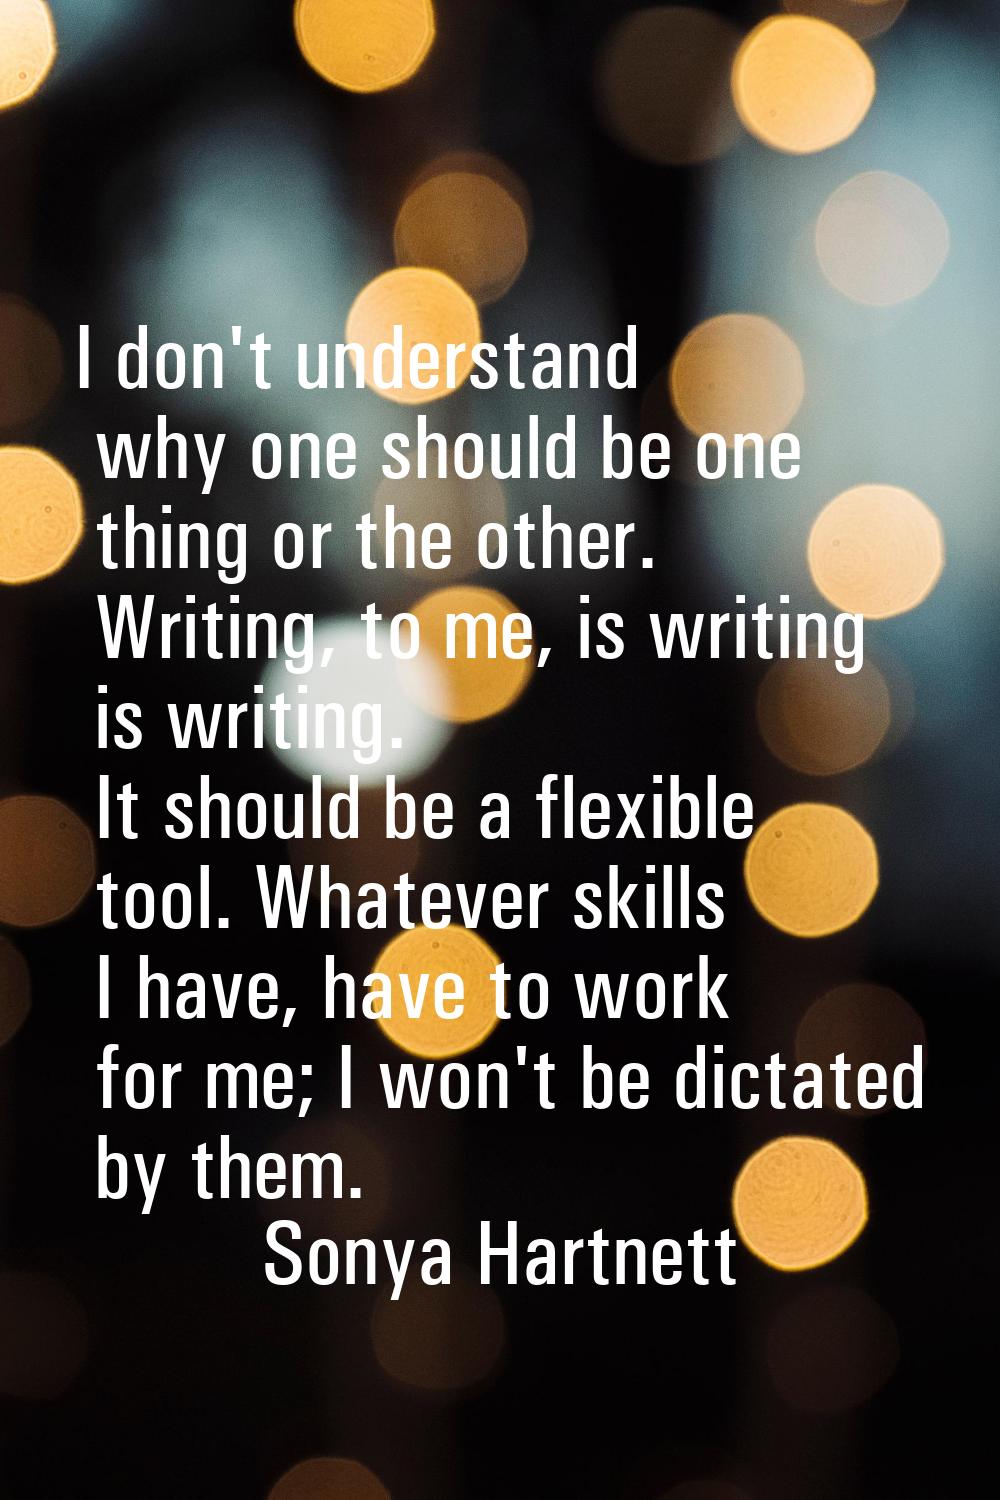 I don't understand why one should be one thing or the other. Writing, to me, is writing is writing.